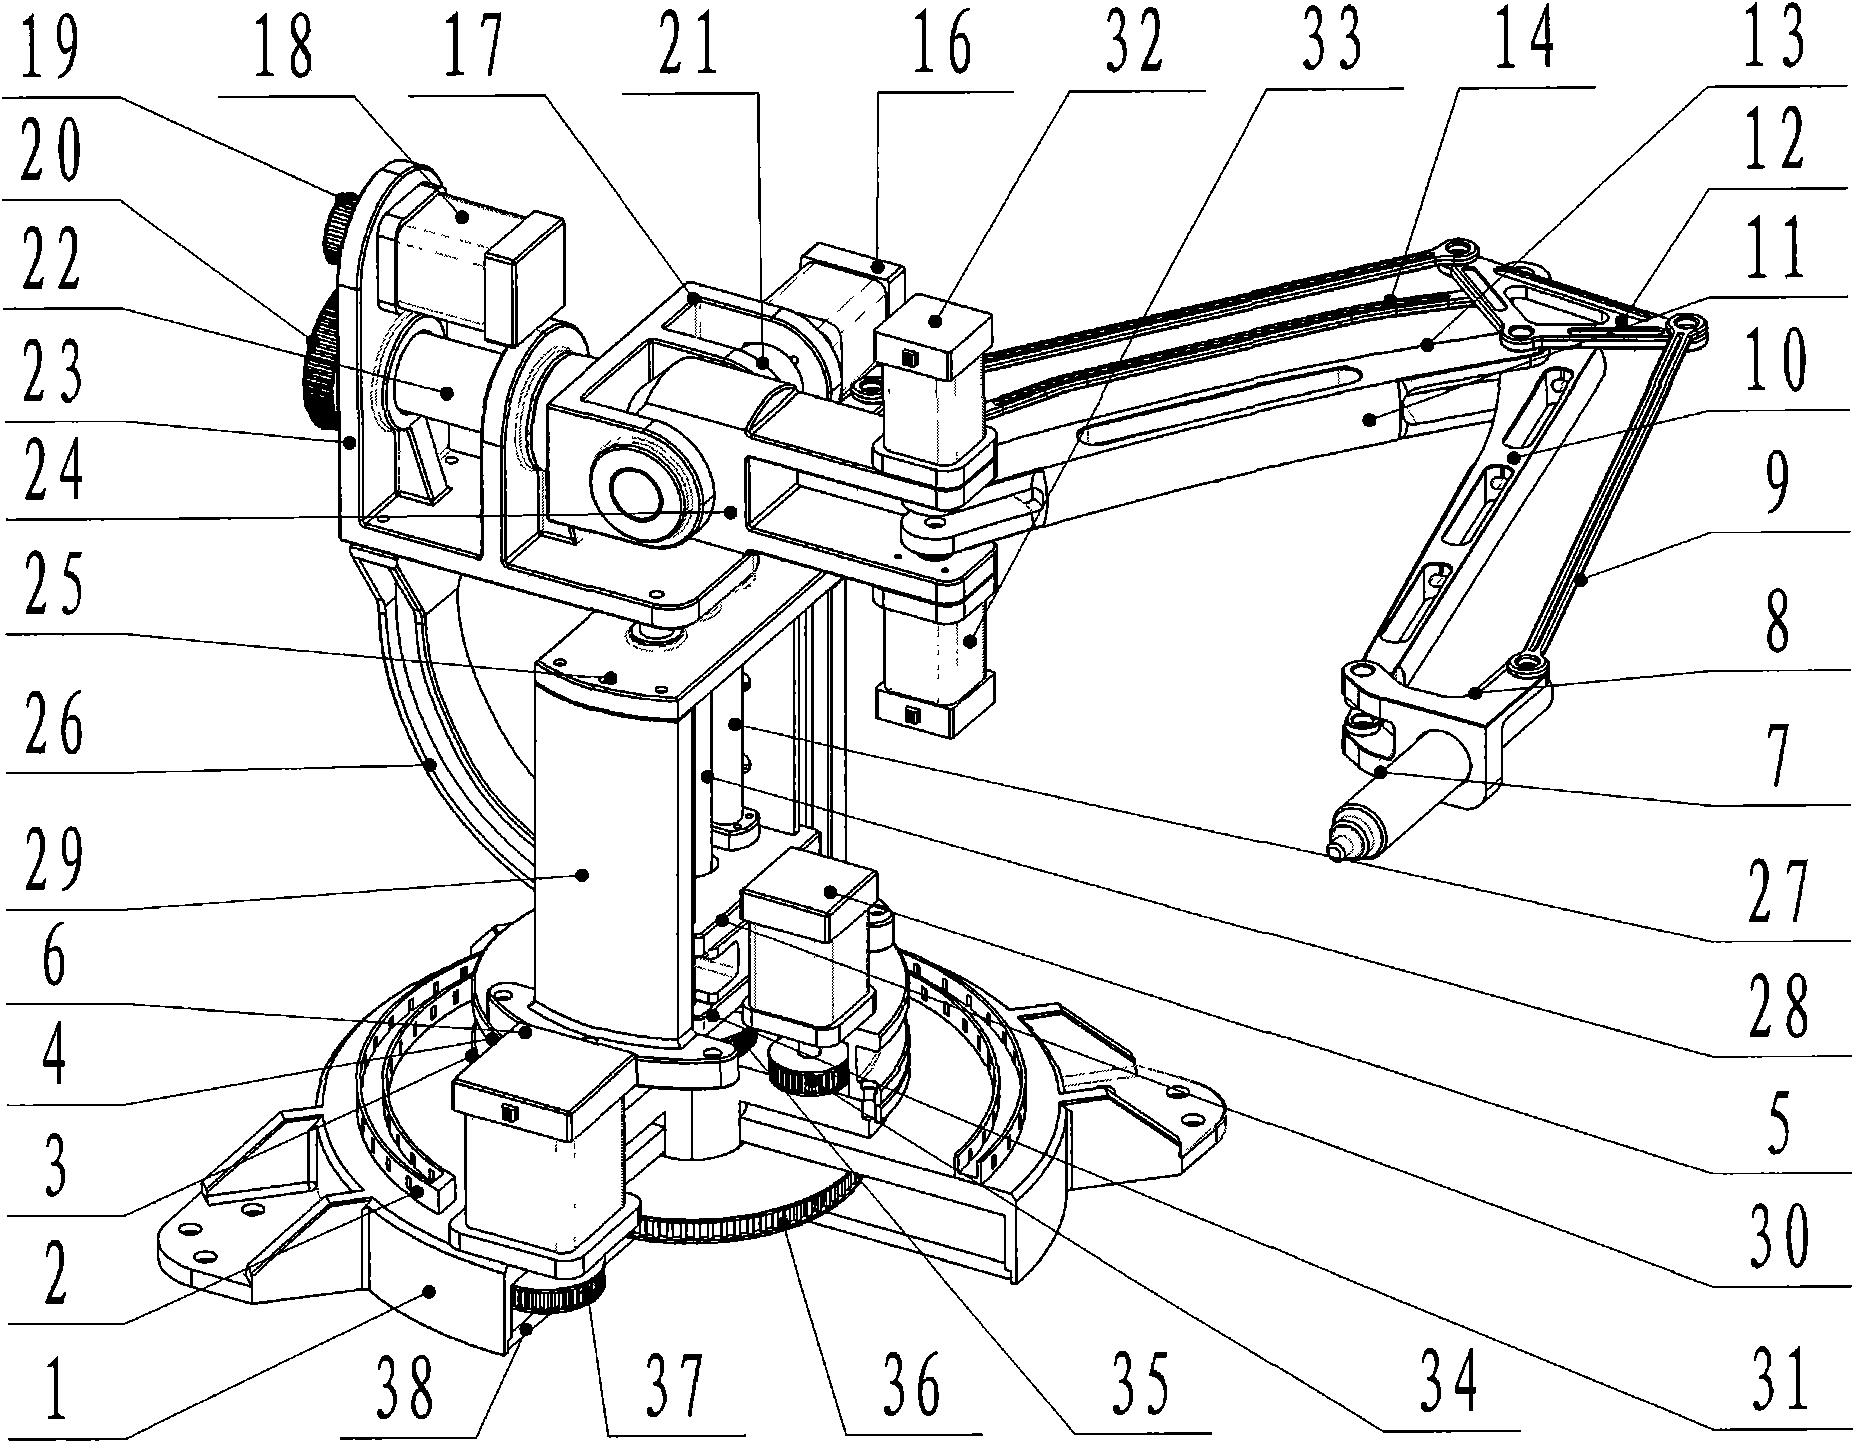 Series-parallel industrial robot with five degrees of freedom